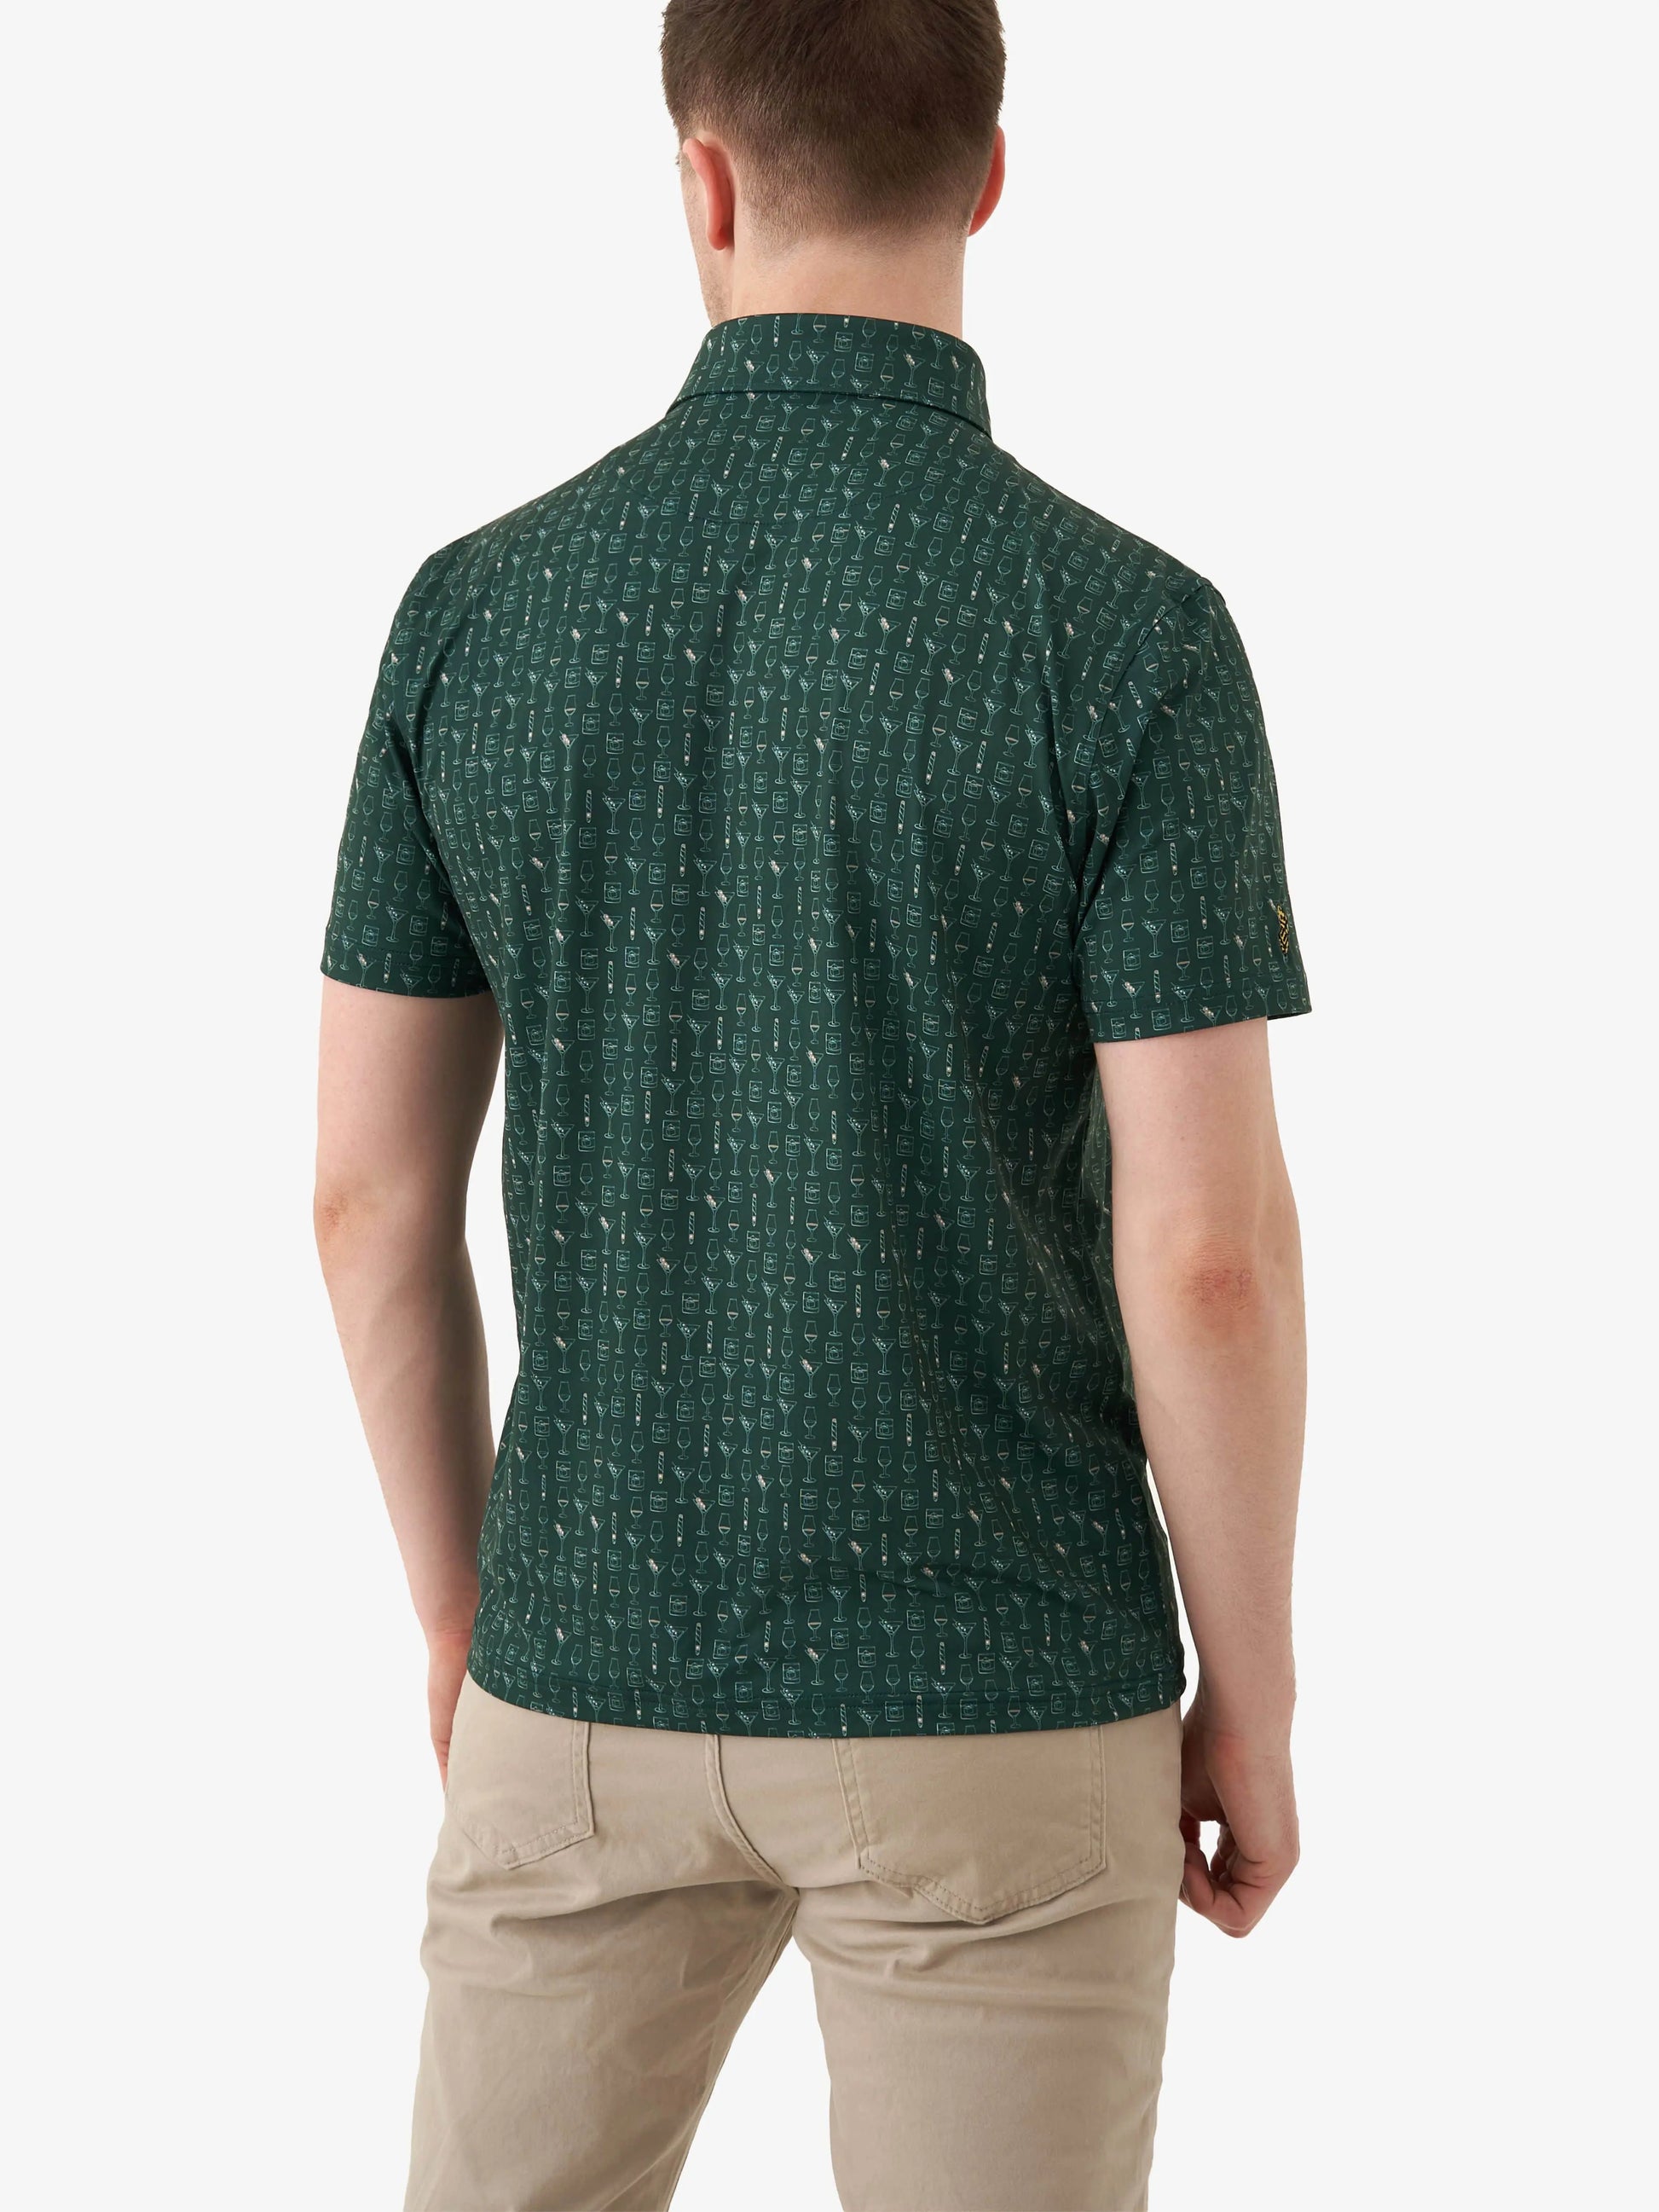 Green golf polo with cocktail design